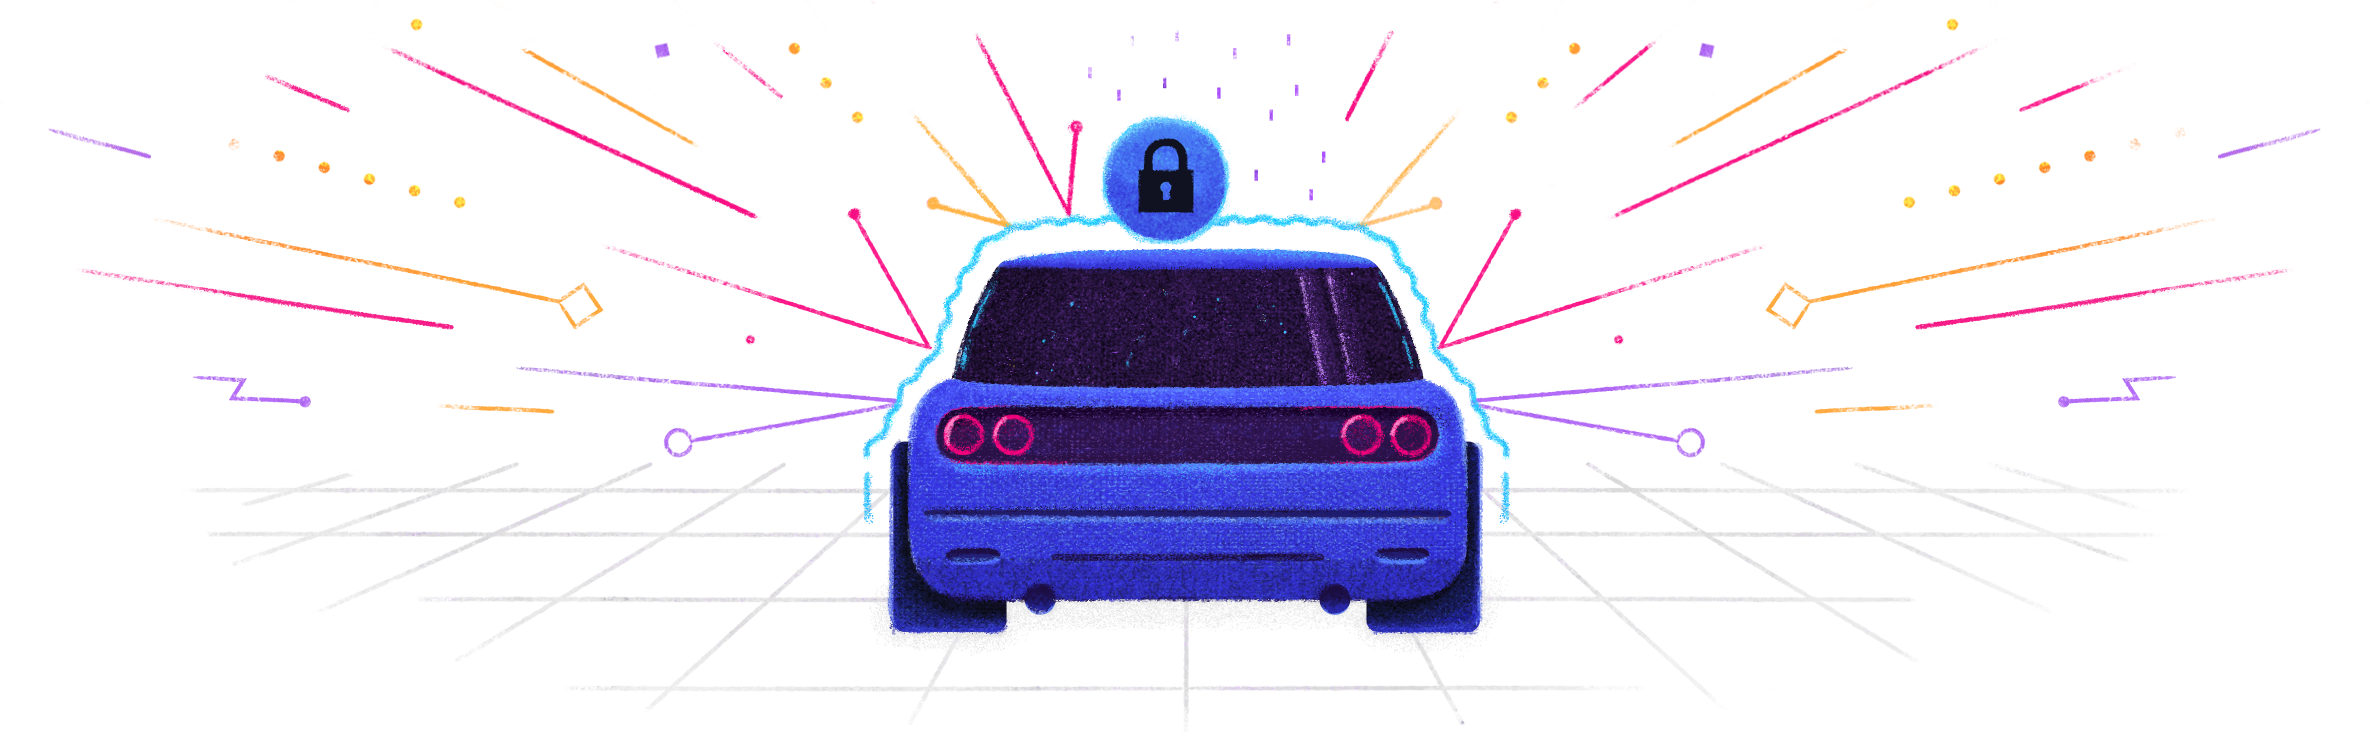 Illustration of a car protected by identity management